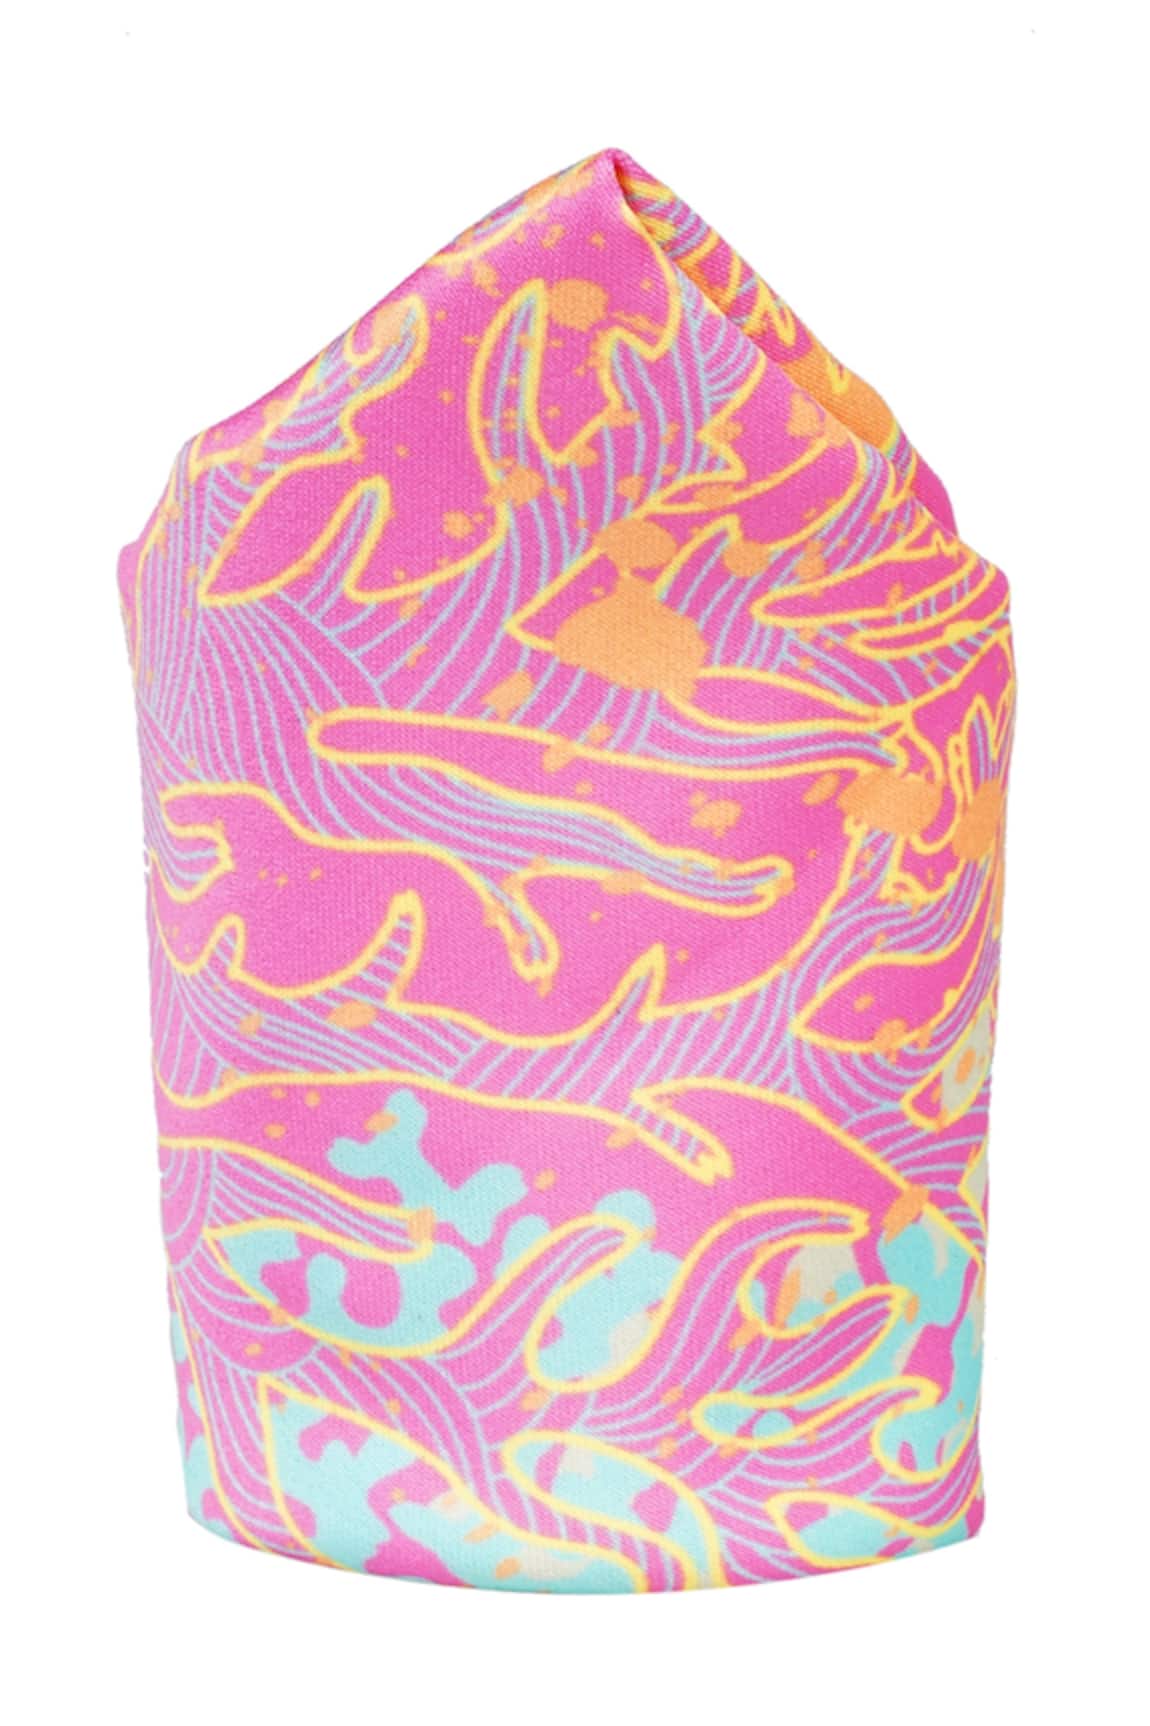 Tossido Abstract Print Pocket Square